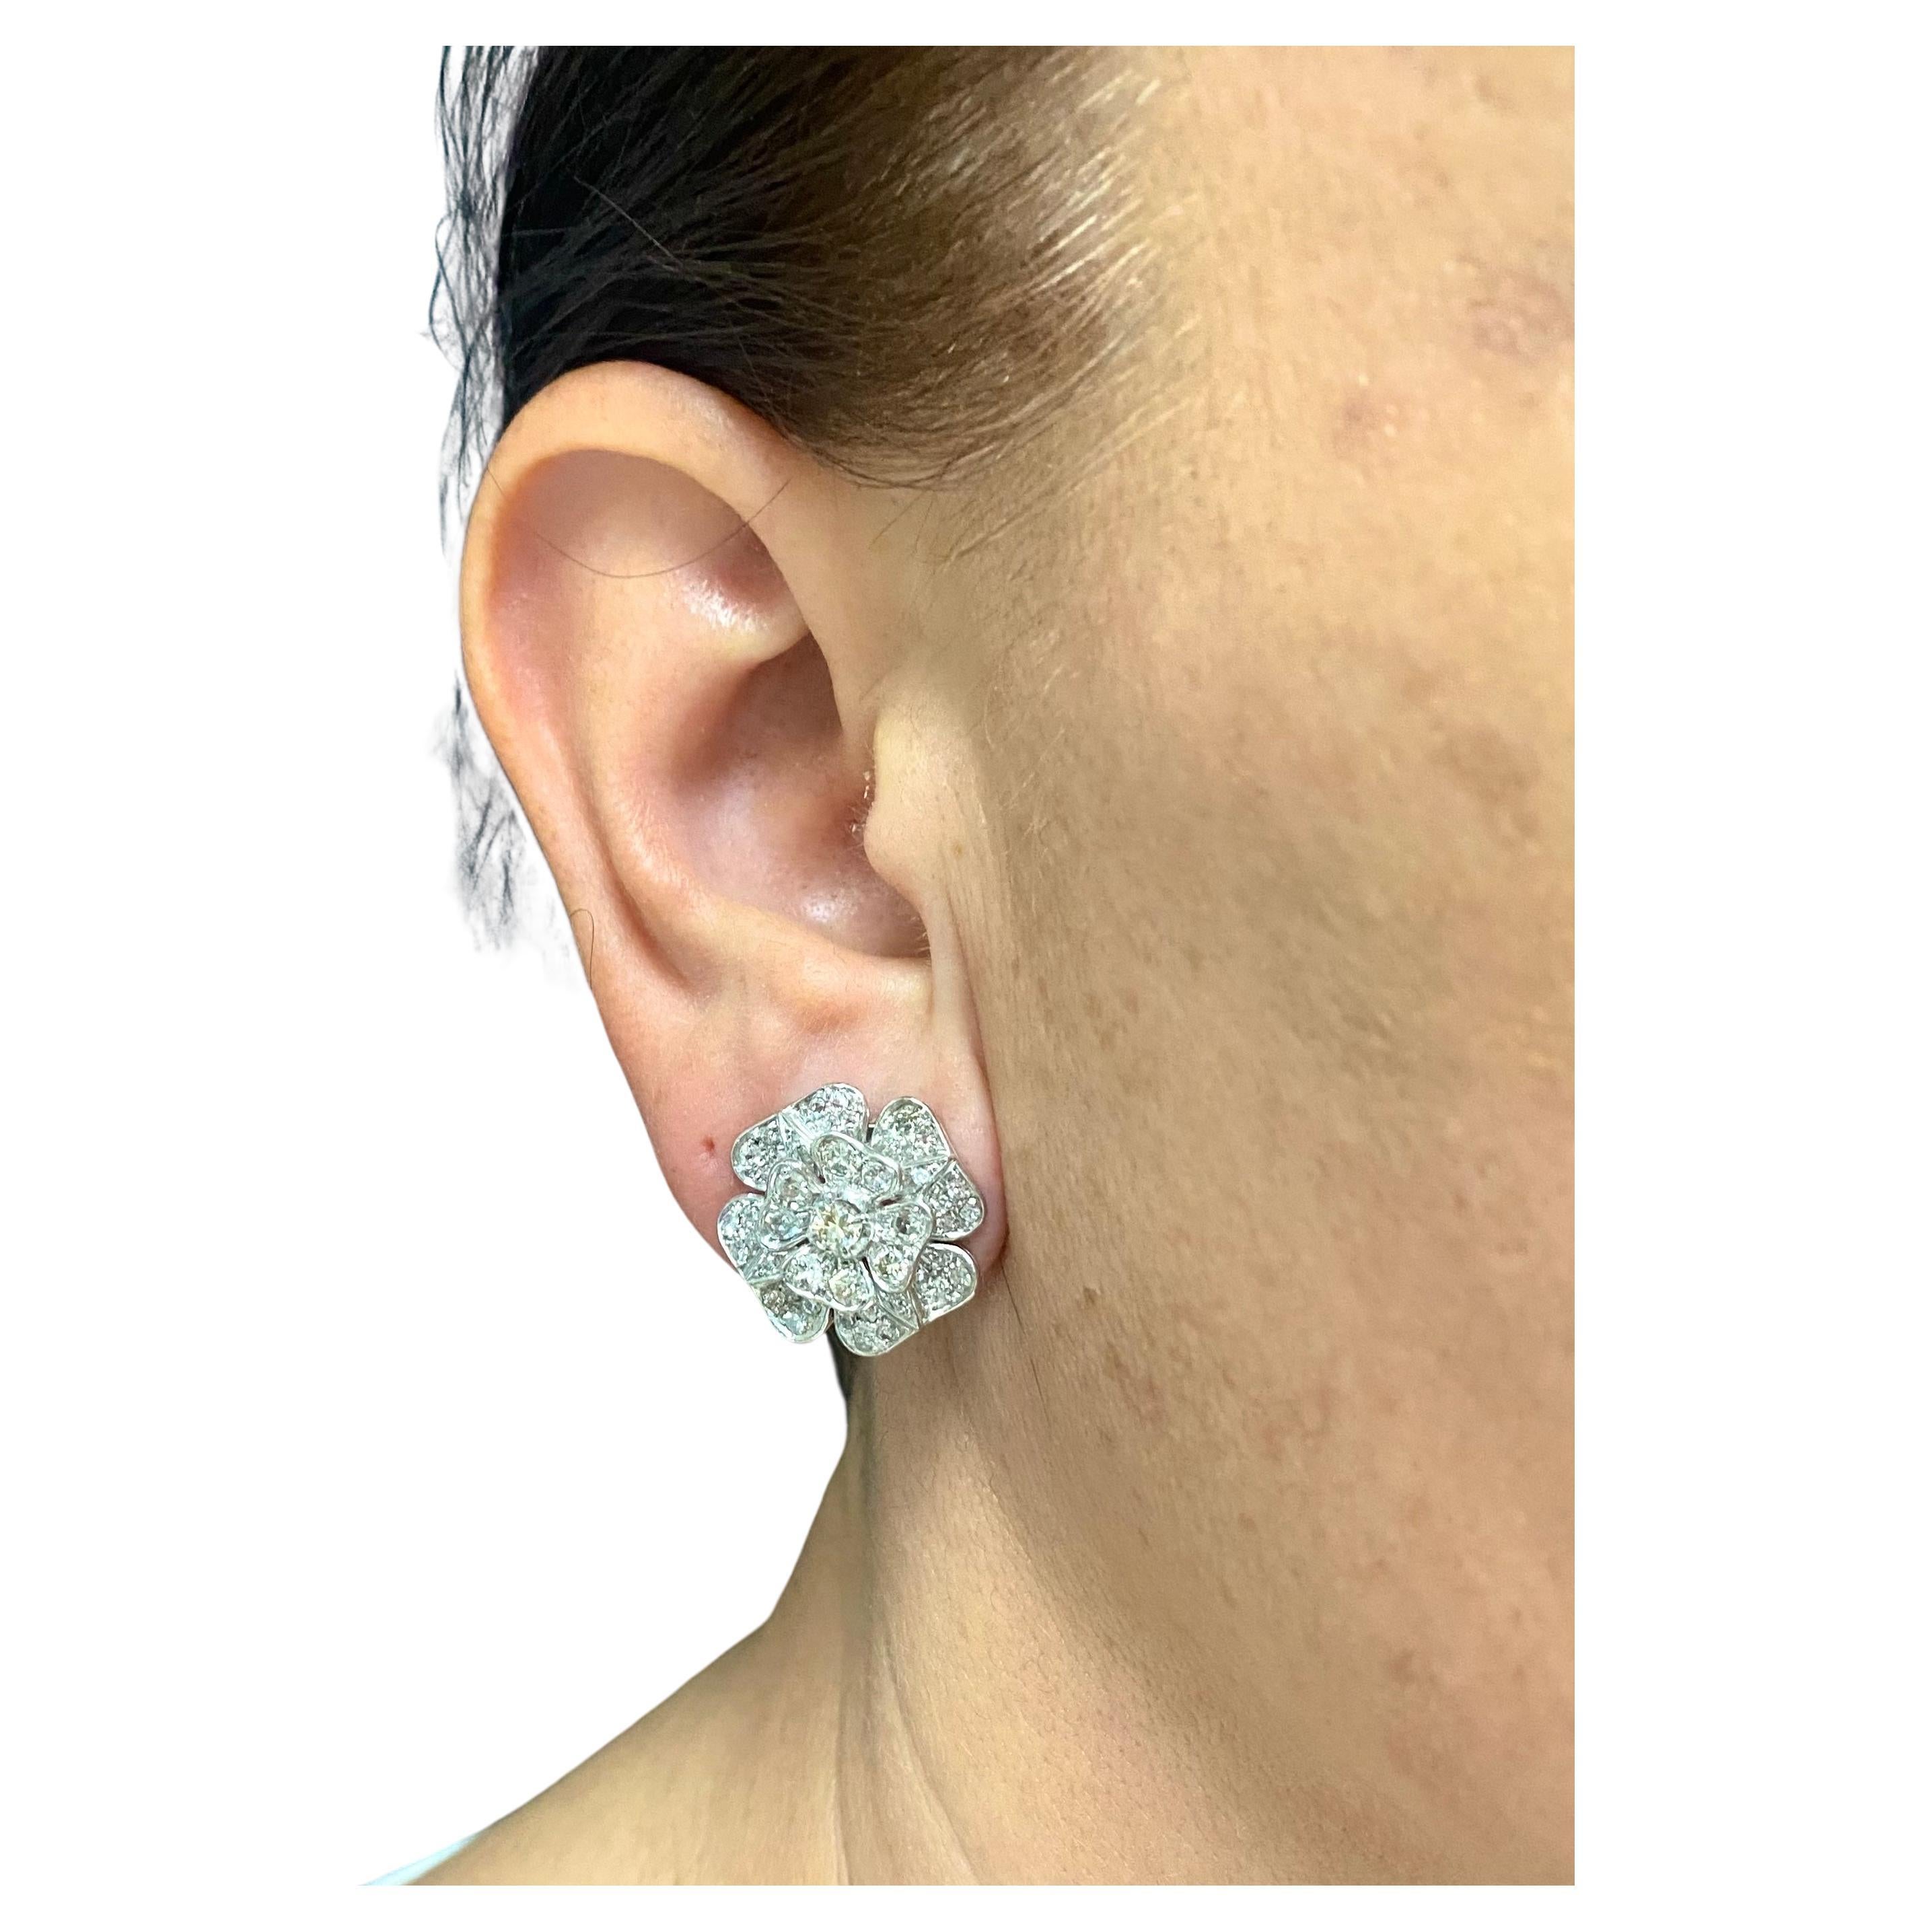 Beautiful clover-shape earrings, made in 18k white gold, feature diamond. 
A very feminine, elegant piece with a floral design. The diamonds are flush mount set which makes gold almost invisible and enhances the whiteness of diamonds. The clover’s